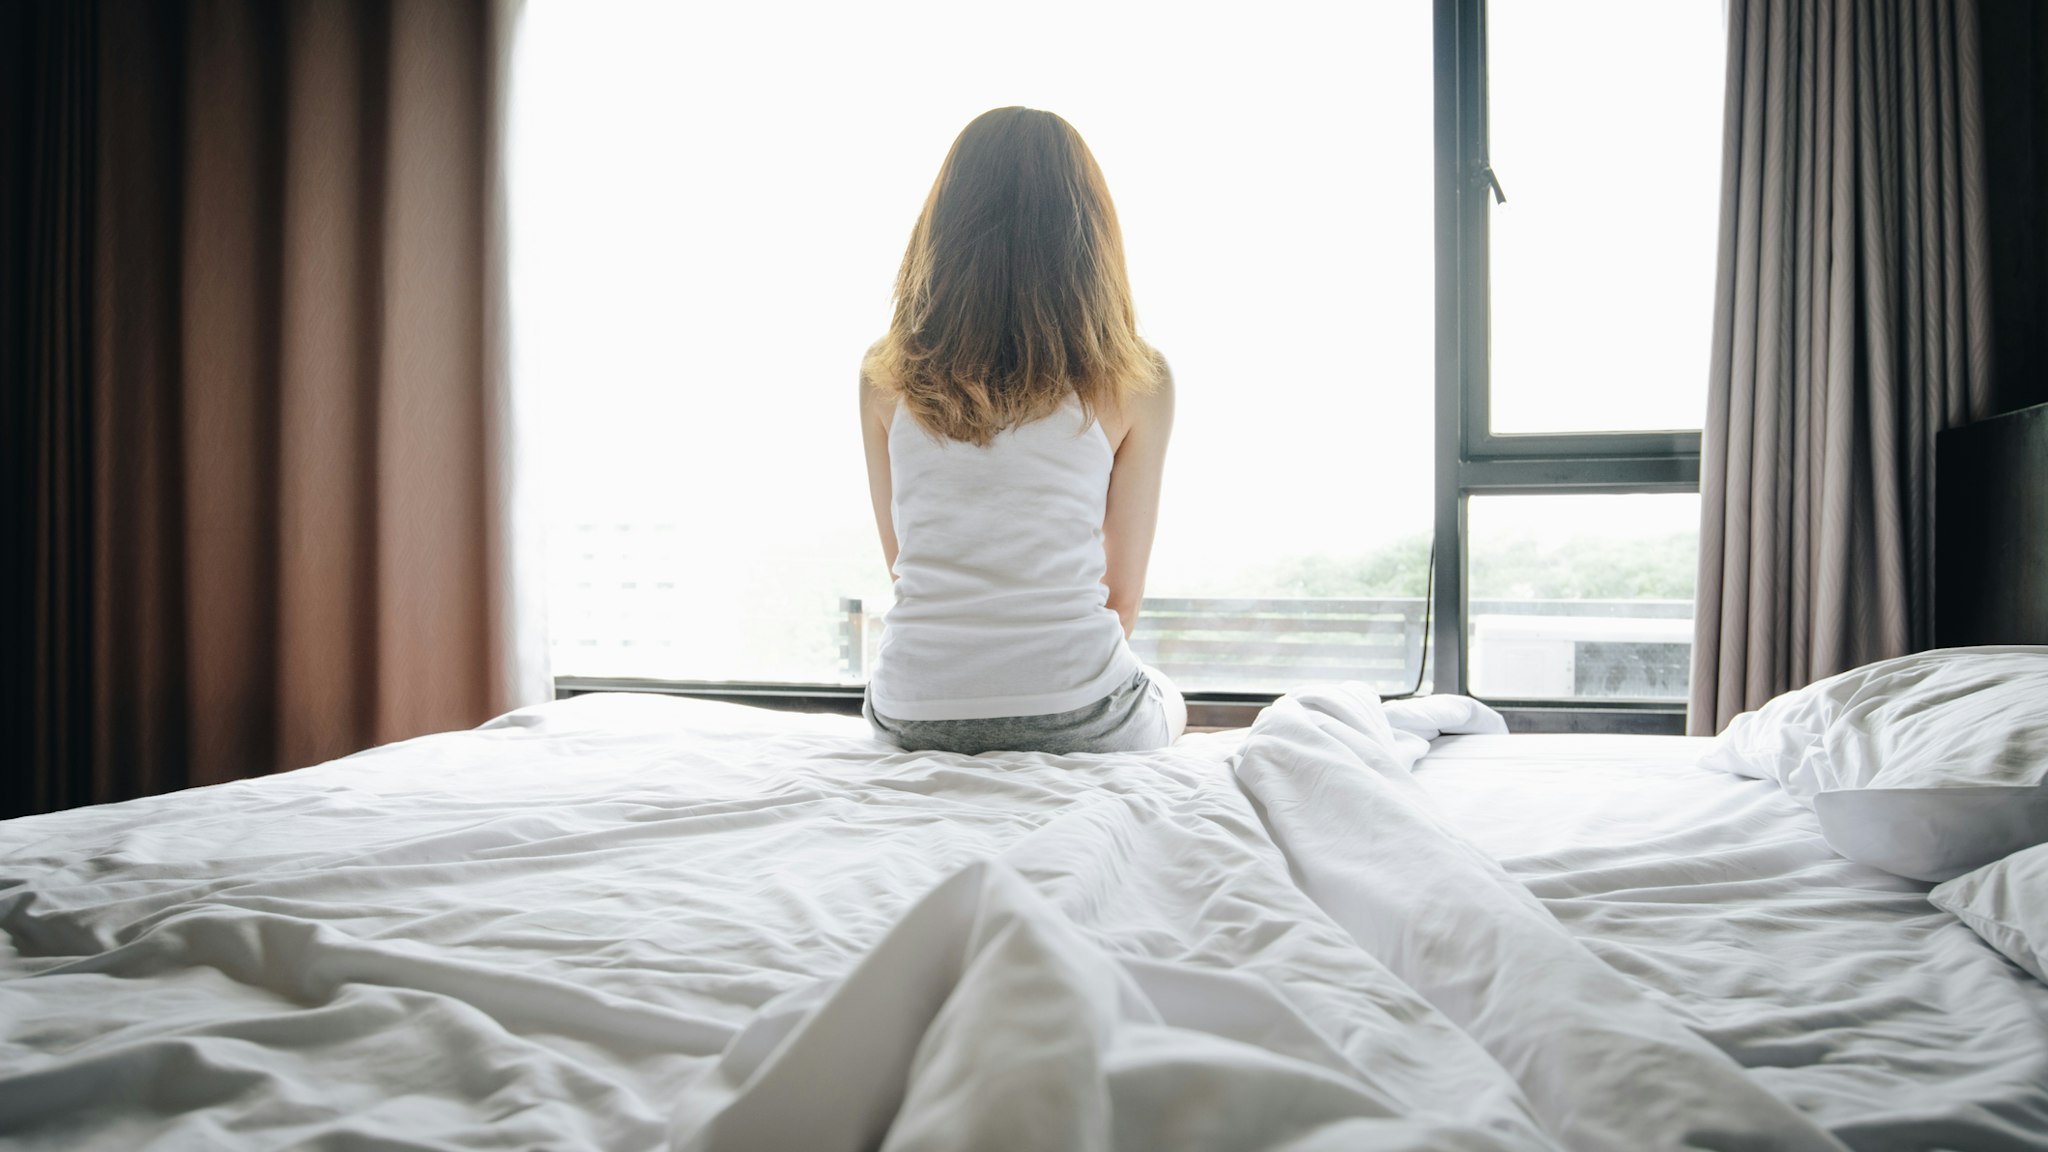 Portrait of depressed woman sitting alone on bed, looking to outside the window. - stock photo